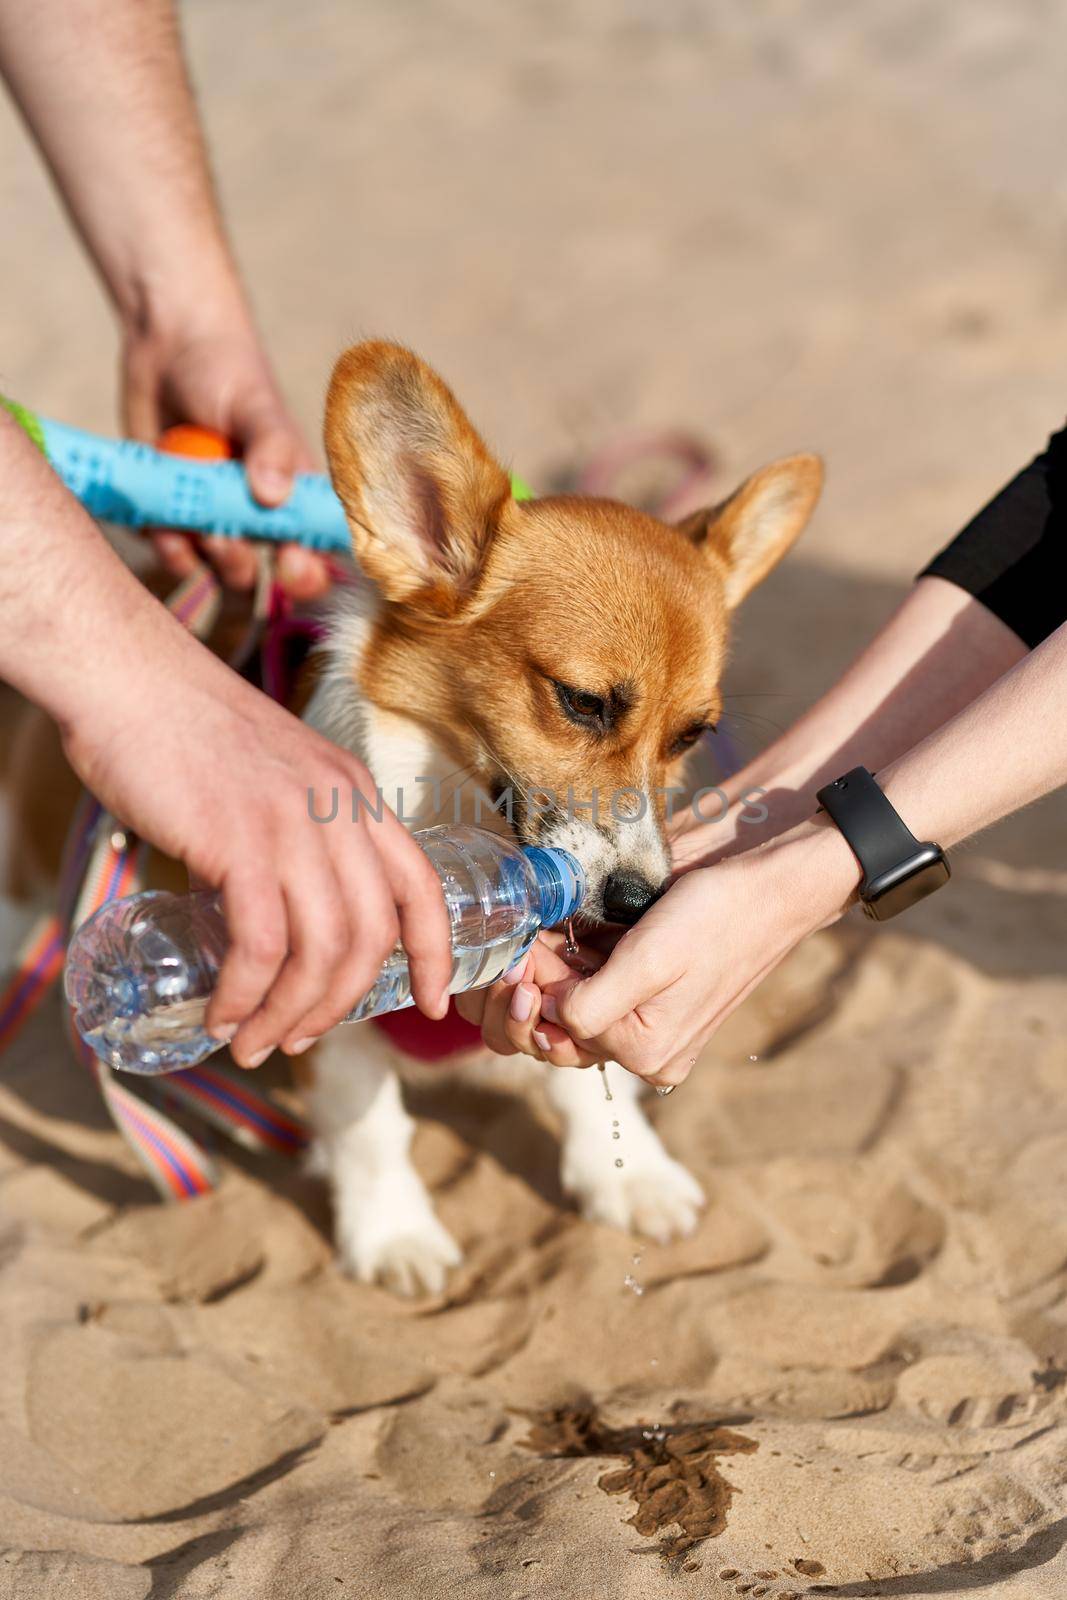 Dog greedily drinks water, owner pours liquid from bottle into palm of hand. Taking care of animals on hot day, protecting them from thirst and dehydration in summer. Corgi puppy close-up caressing.